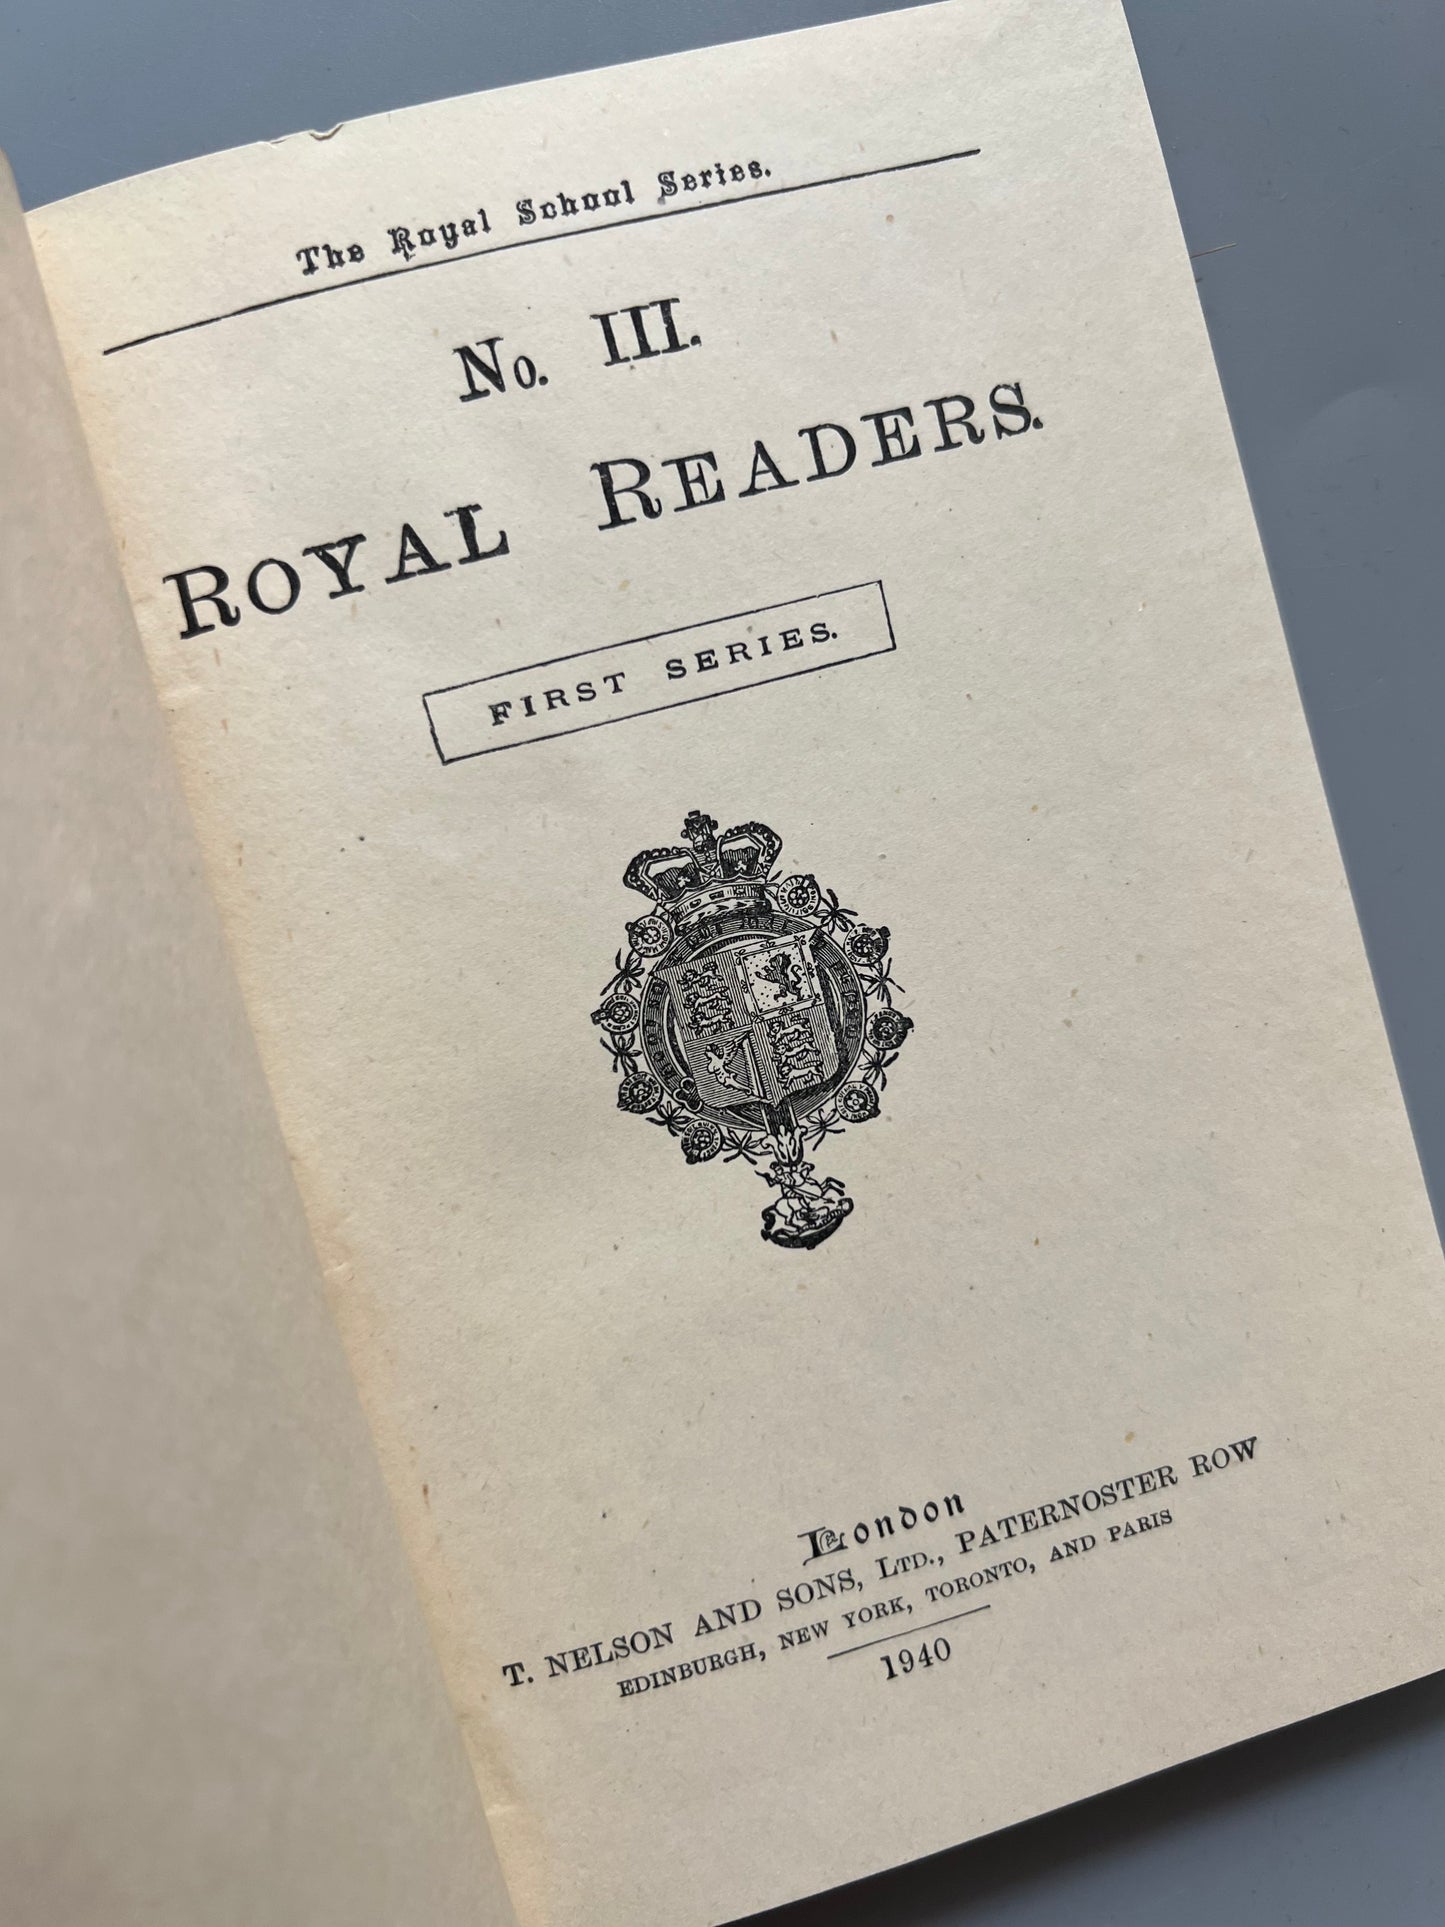 The Royal Readers nº3. Royal School Series - Thomas Nelson and Sons, 1940